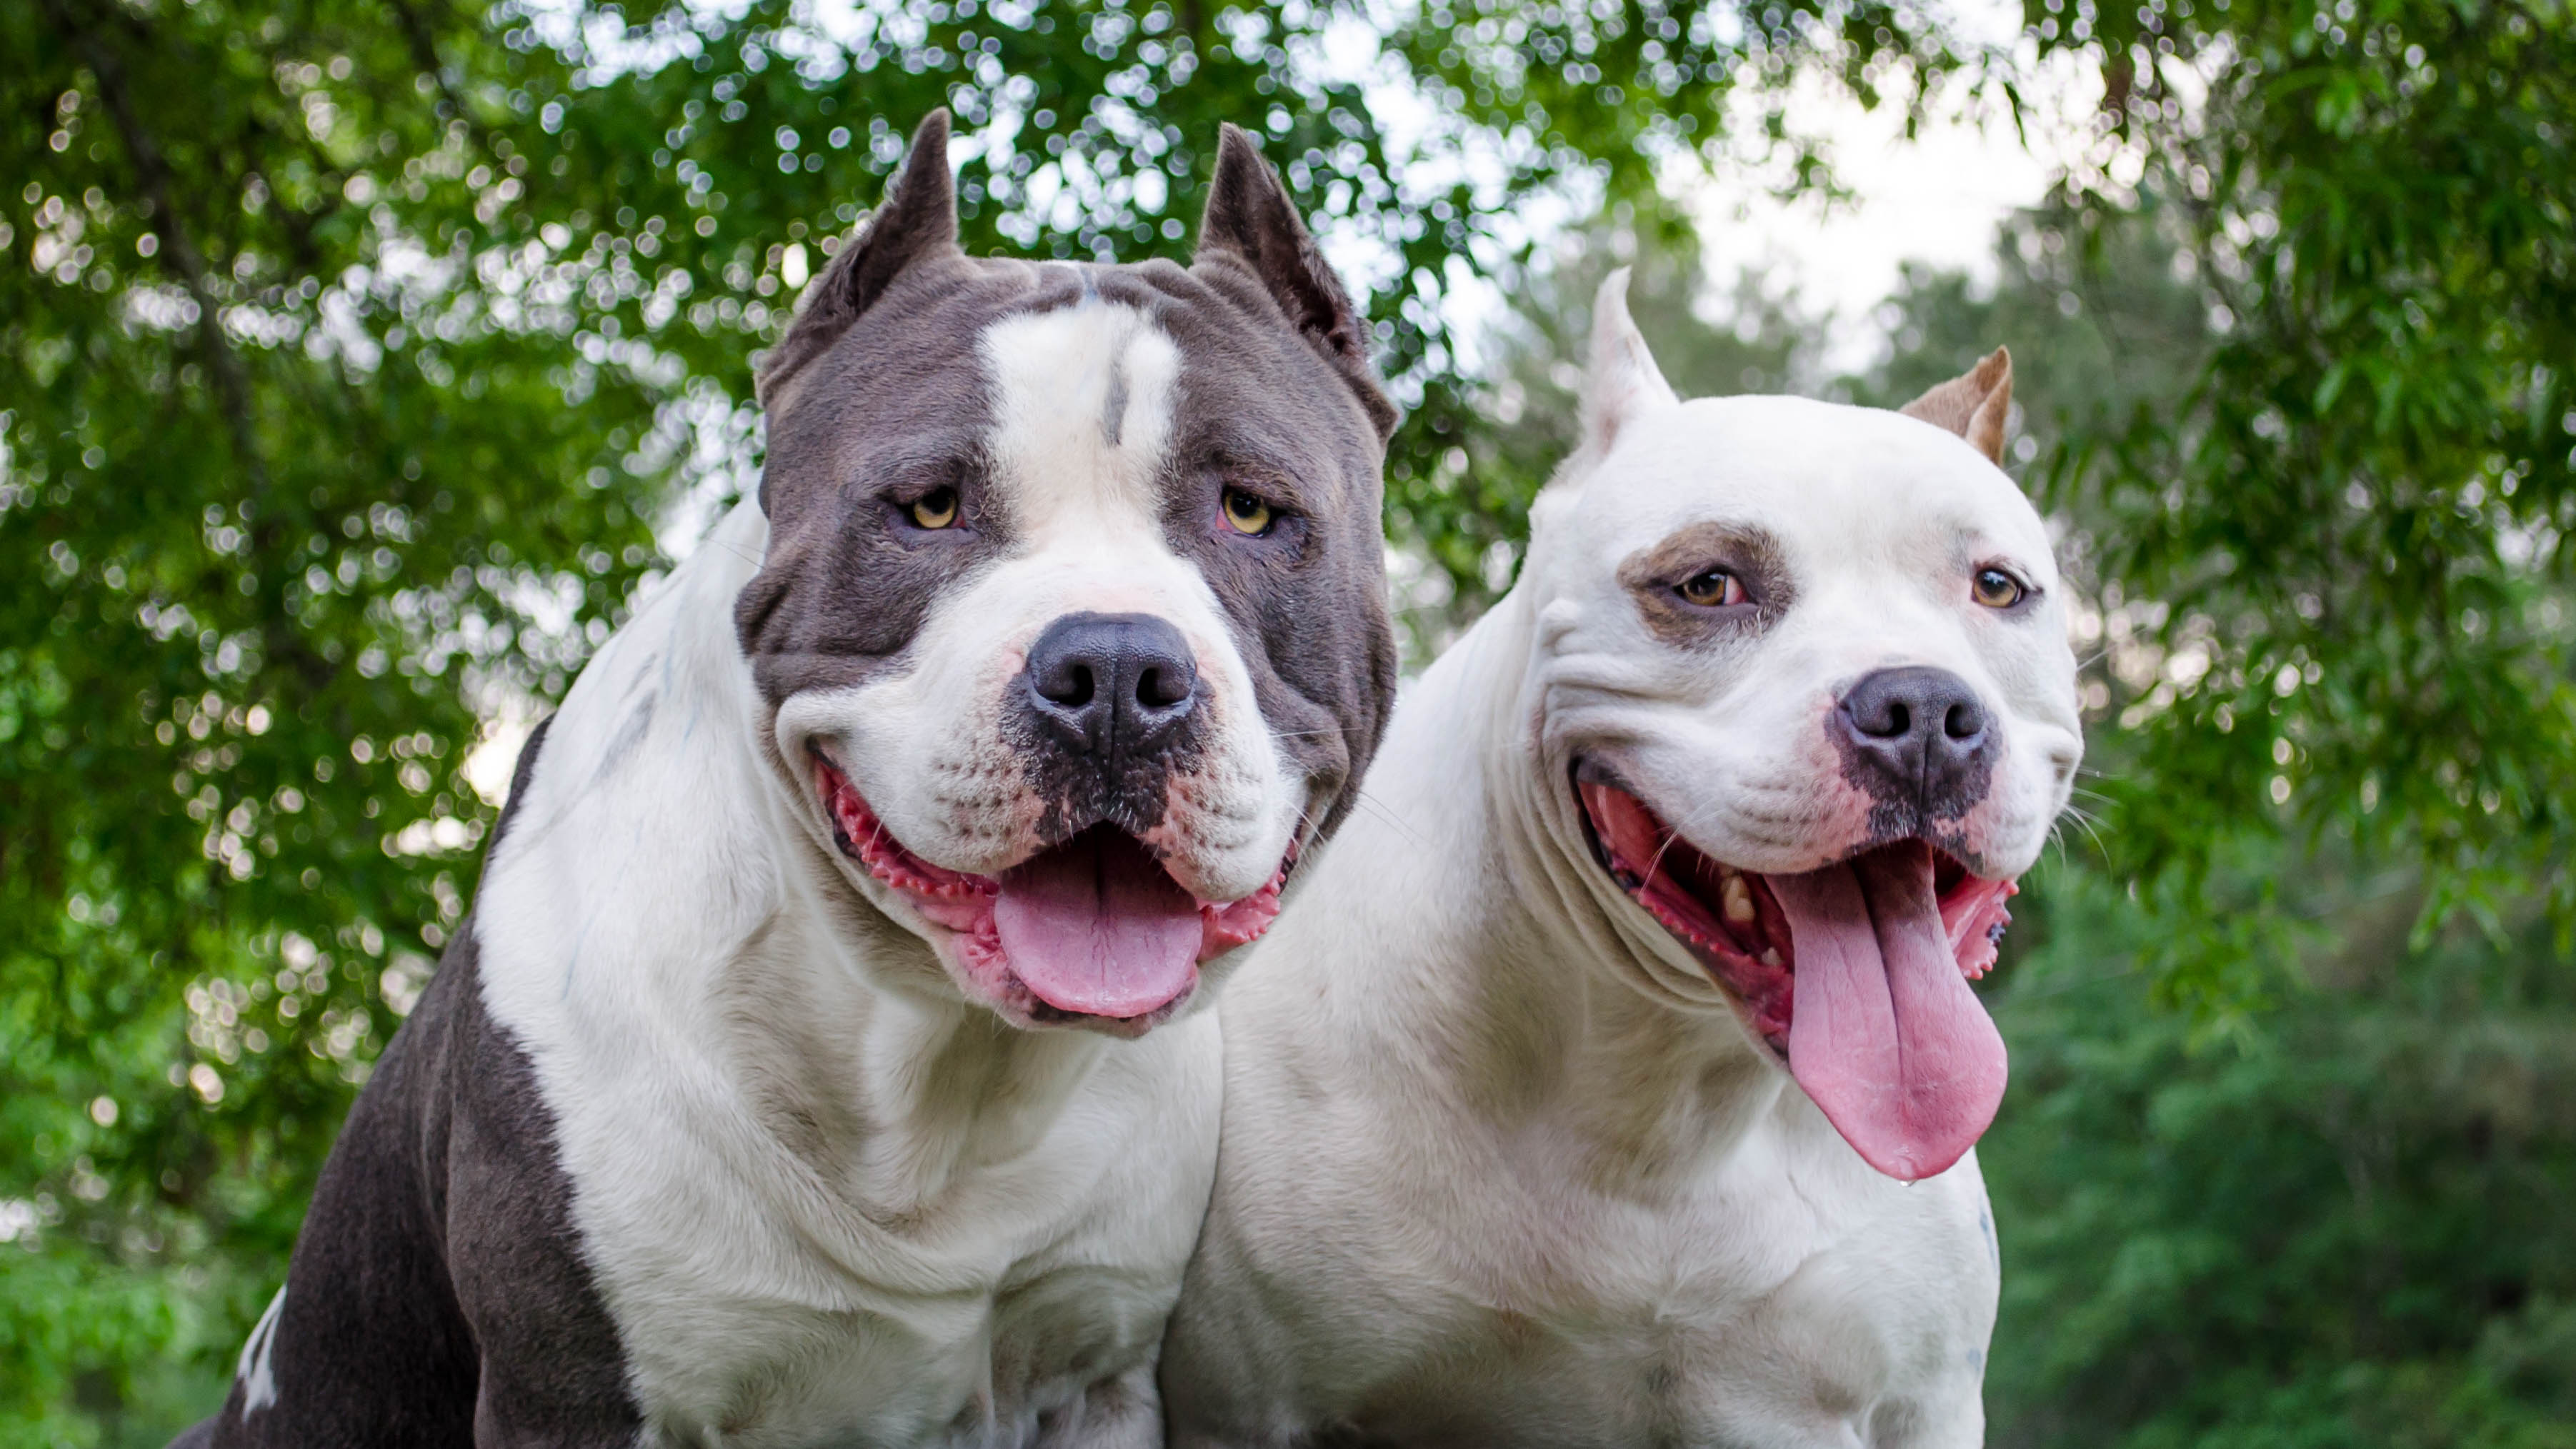 Difference between AmStaff and Staffordshire Bull Terrier